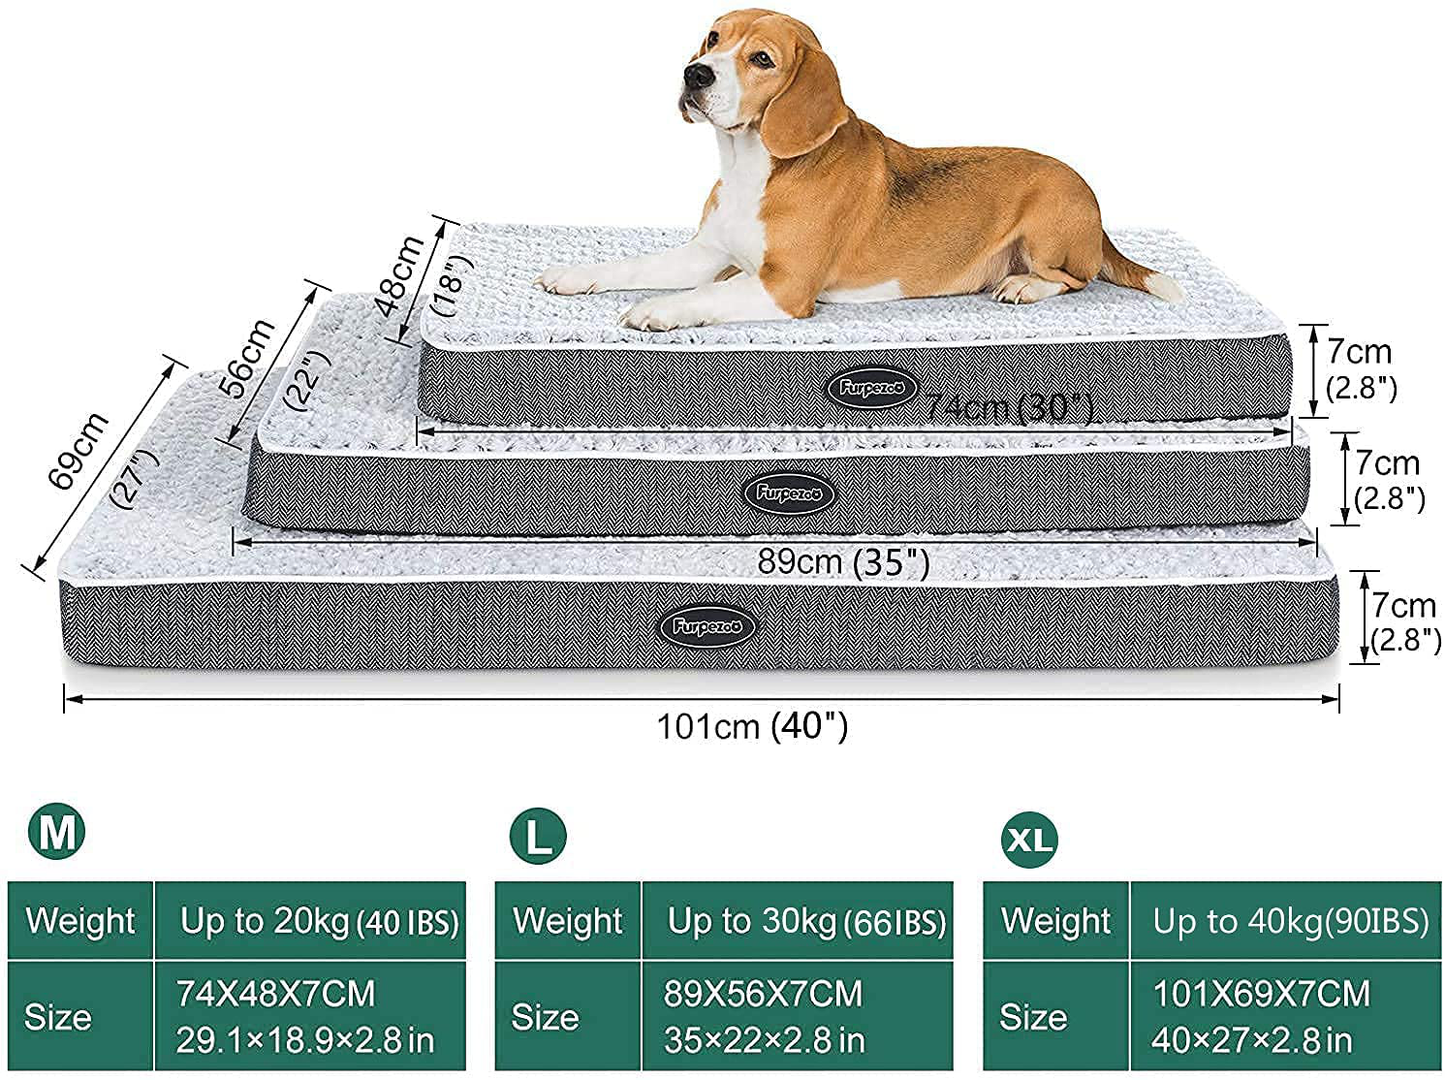 Furpezoo Orthopedic Dog Bed for Small Medium Large Dog,Dog Crate Mattress with Memory Foam, Washable Dog Bed of Comfortable Rose Plush Beds with Removable Cover, White